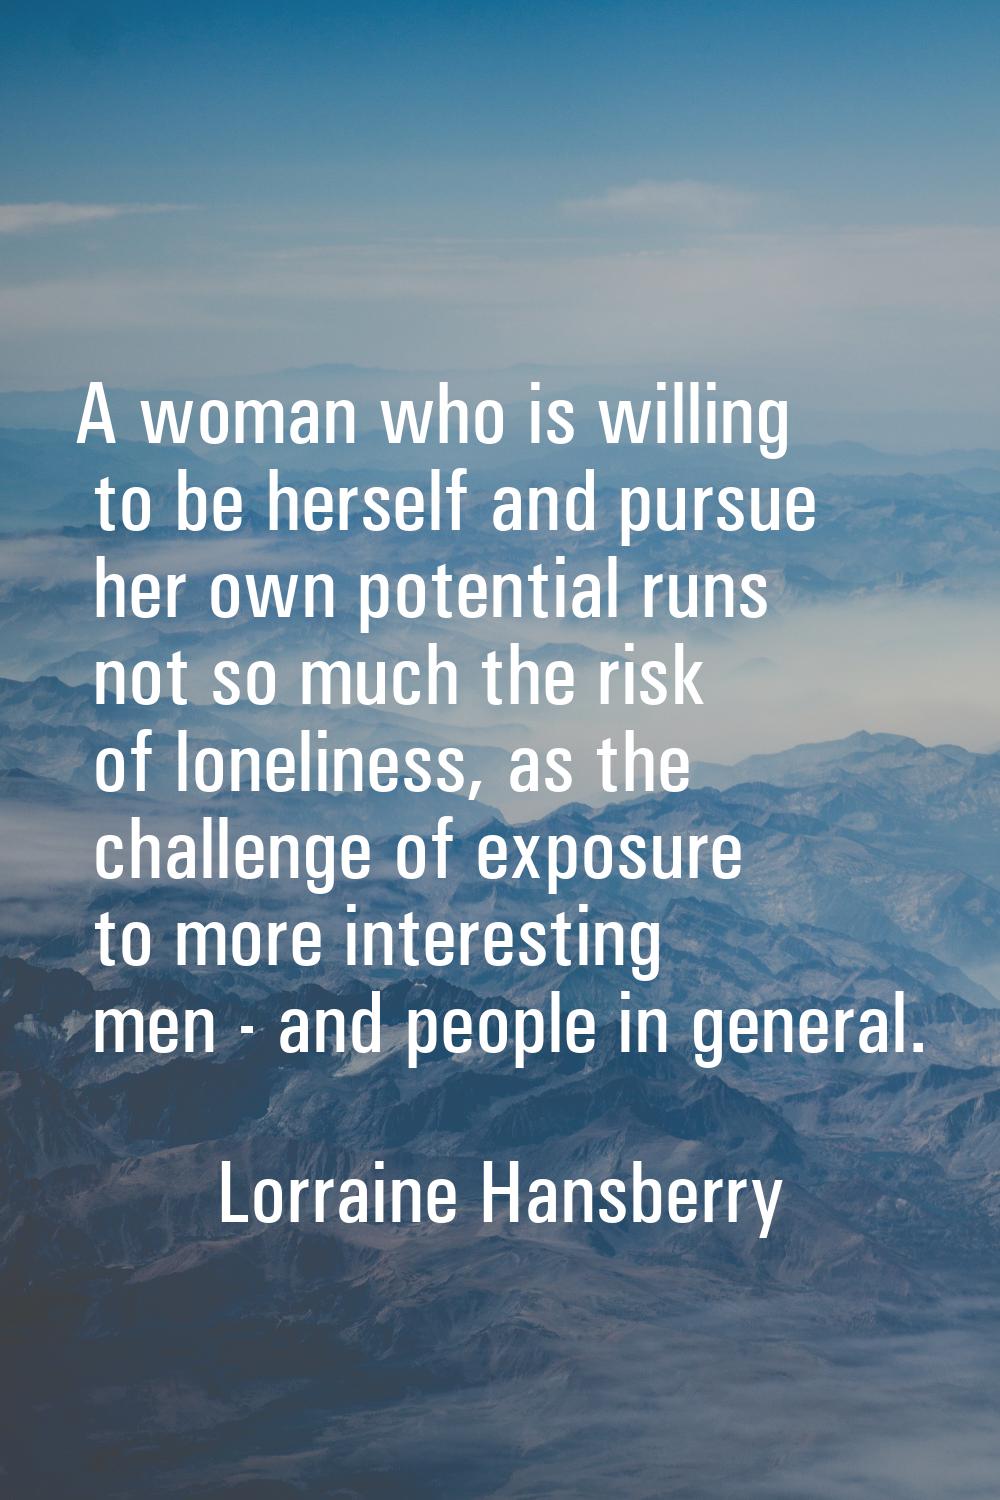 A woman who is willing to be herself and pursue her own potential runs not so much the risk of lone